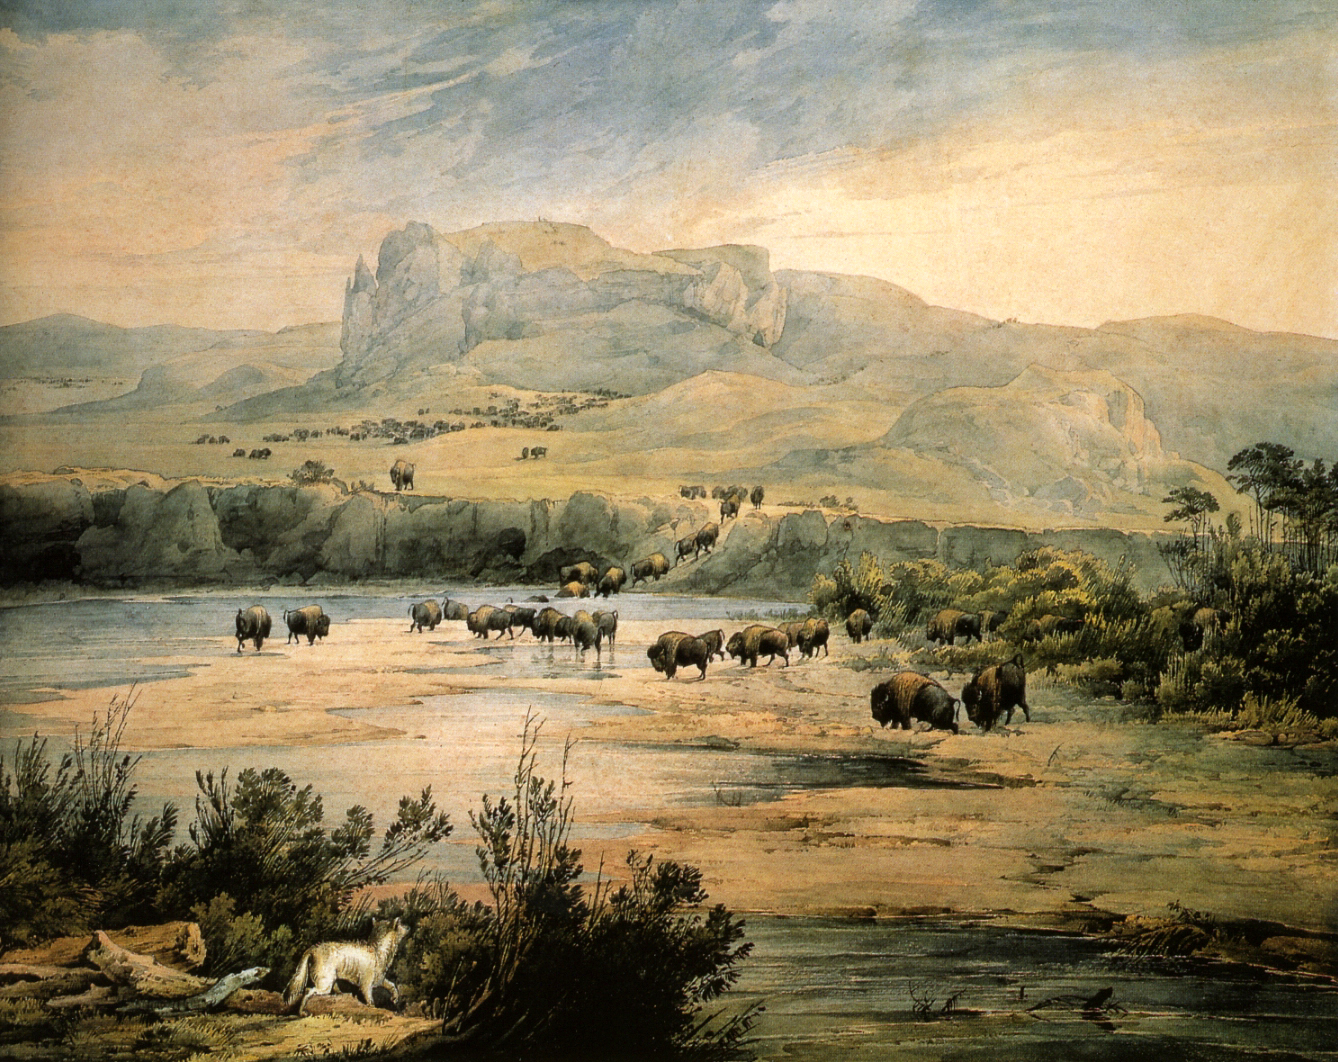 A large scene depicts herds of buffalo rolling through a huge area of land.